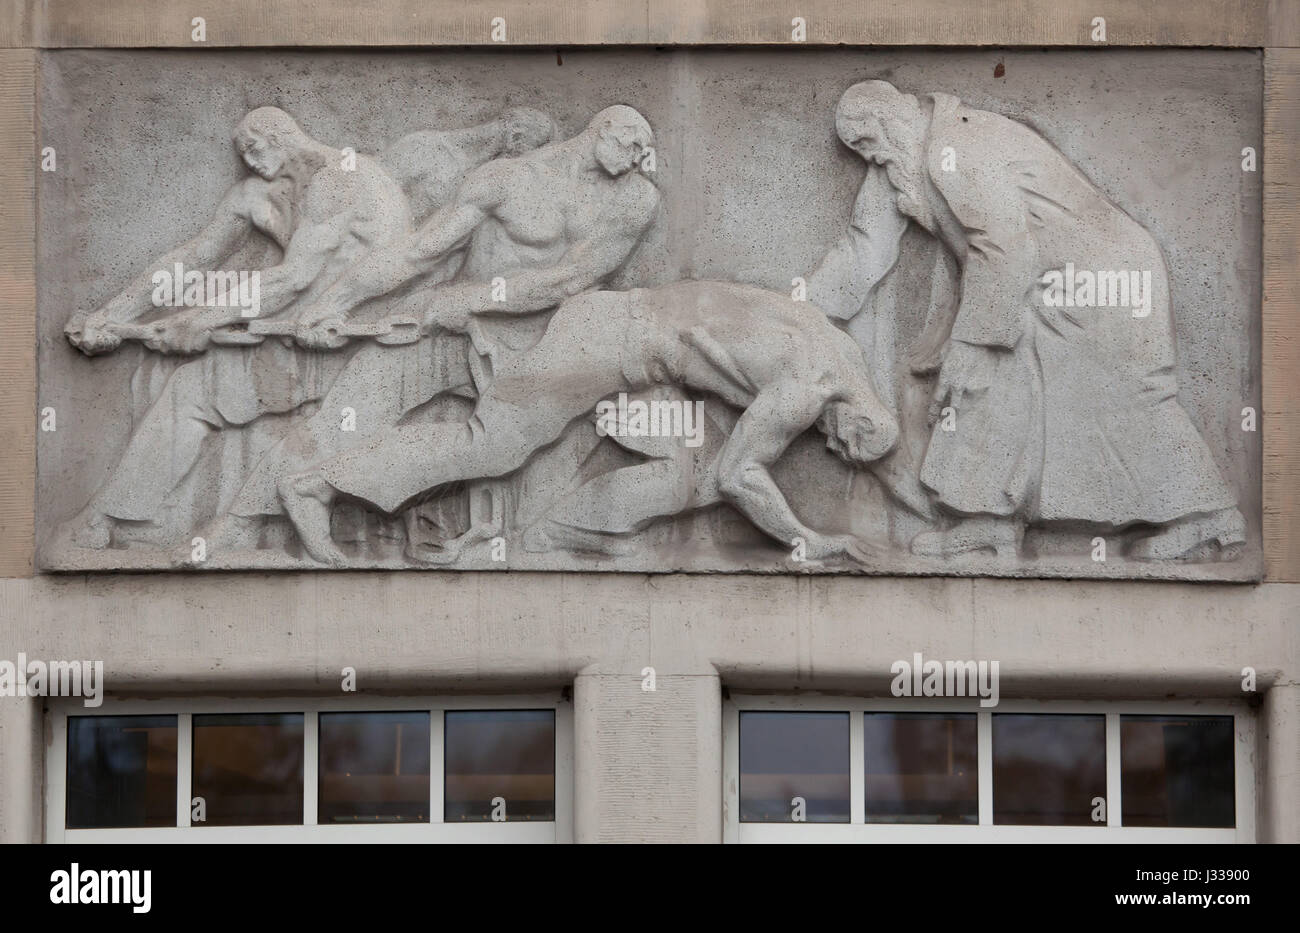 Workers rescue the injured person. Relief by Hungarian sculptor Mihaly Biro on the south wing of the Art Nouveau building of the Budapest Workers Insurance Fund in Budapest, Hungary. The building, now used as the seat of the National Social Insurance Centre (OTI), was designed by Hungarian architects Marcell Komor and Dezso Jakab and built in 1913. The north wing was added in the 1930s. Stock Photo